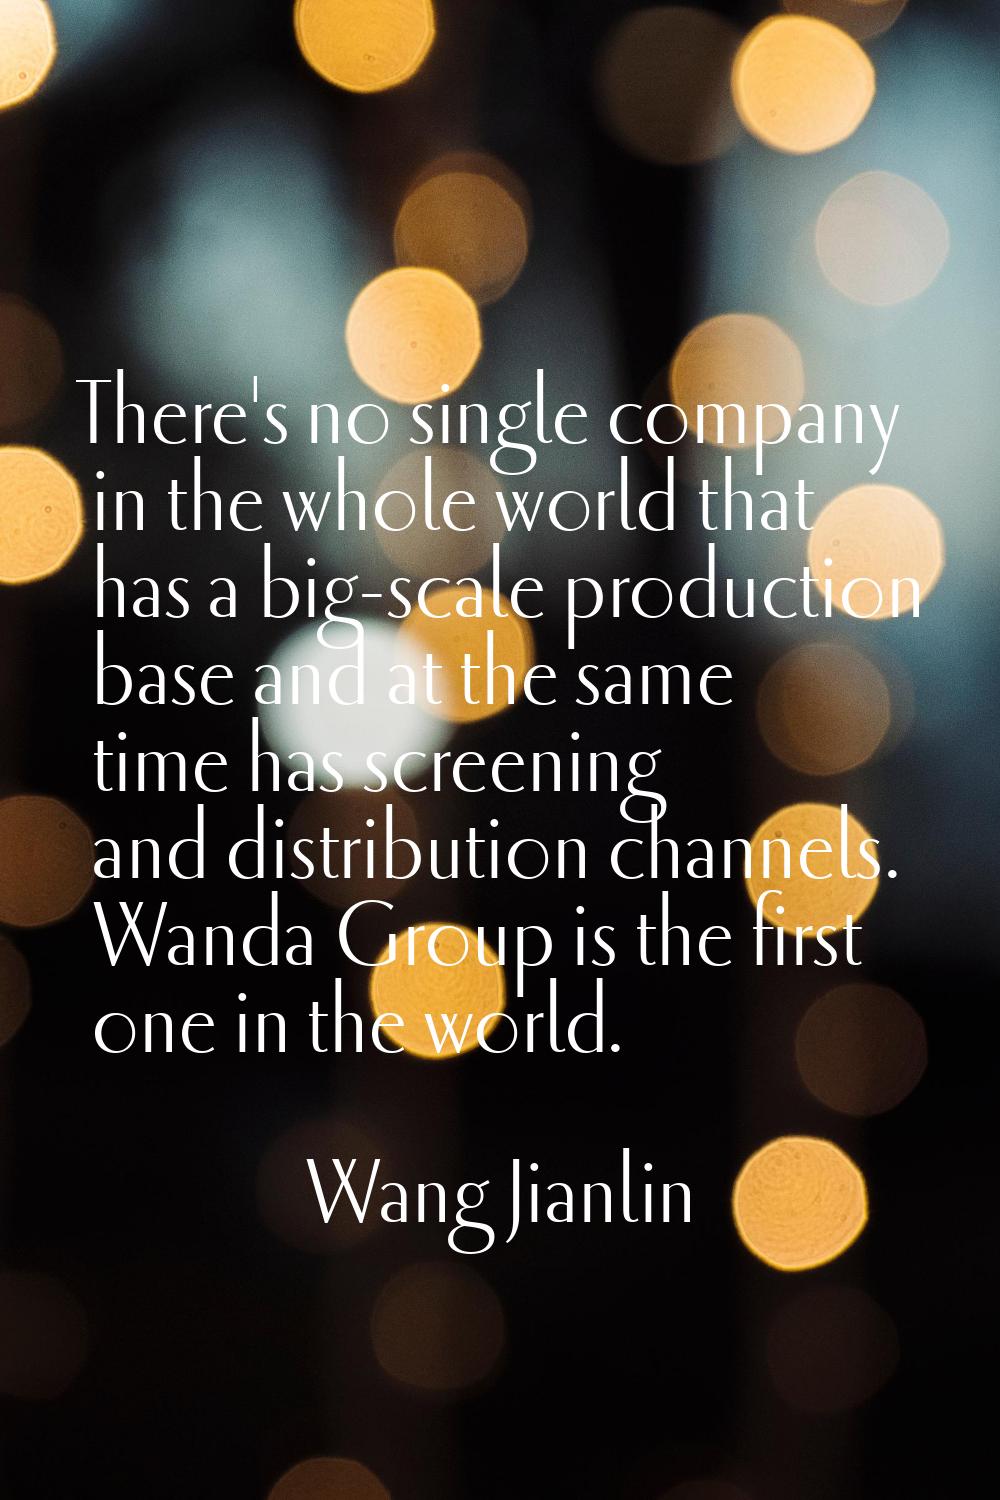 There's no single company in the whole world that has a big-scale production base and at the same t